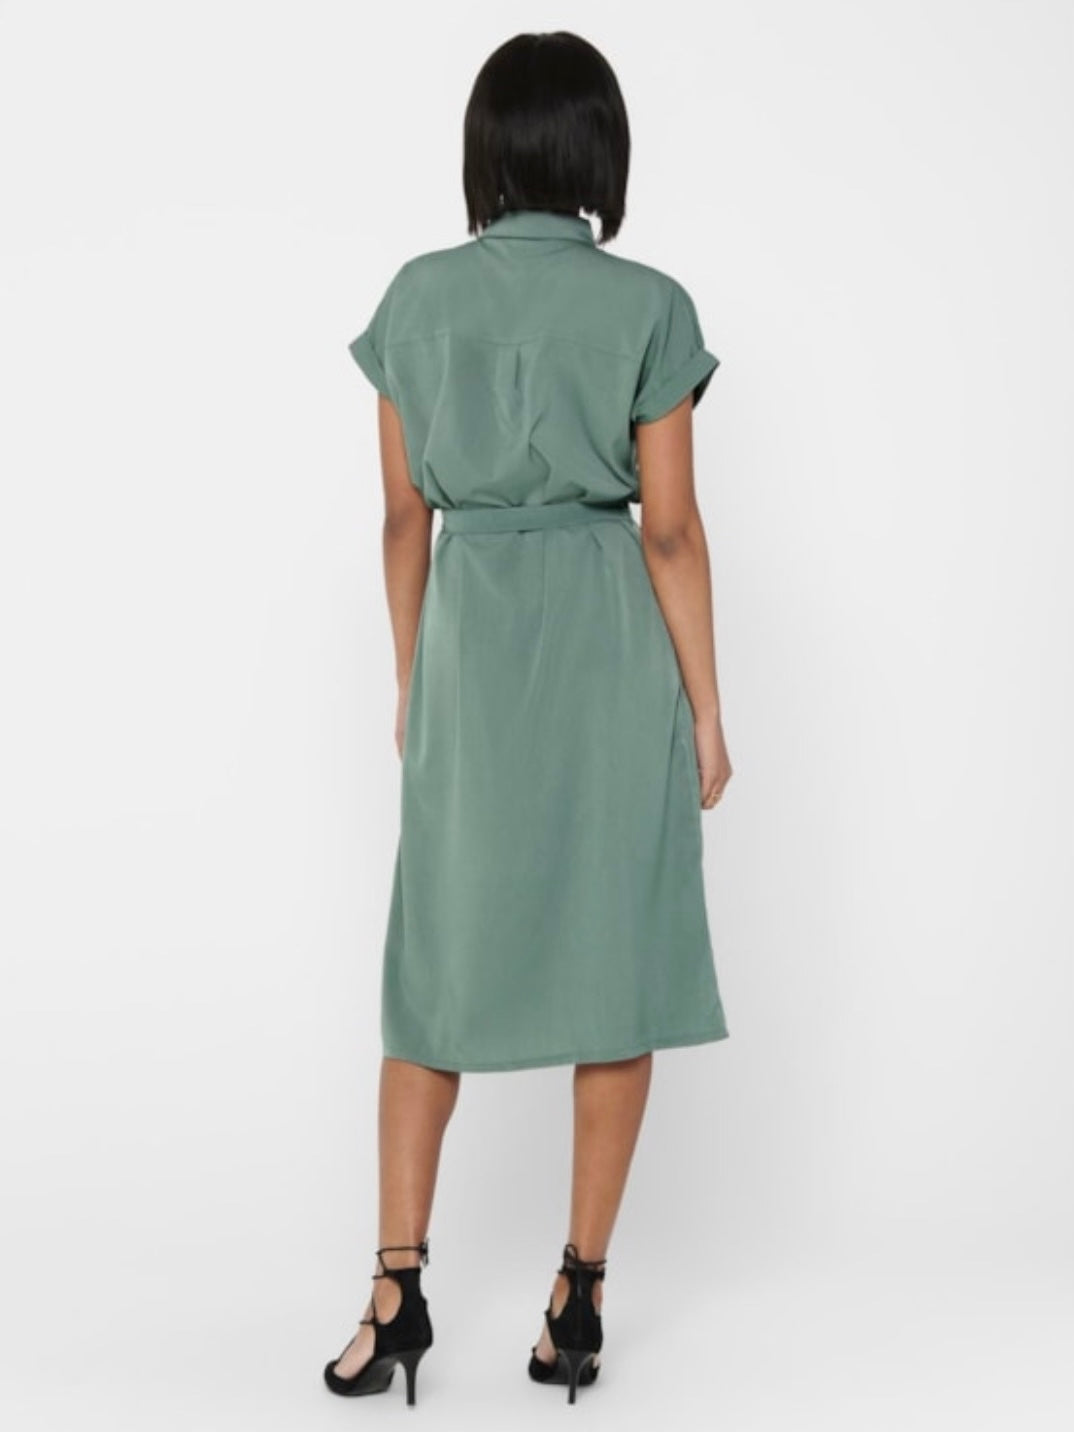 ONLY - HANNOVER S/S SHIRT DRESS - LAUREL WREATH